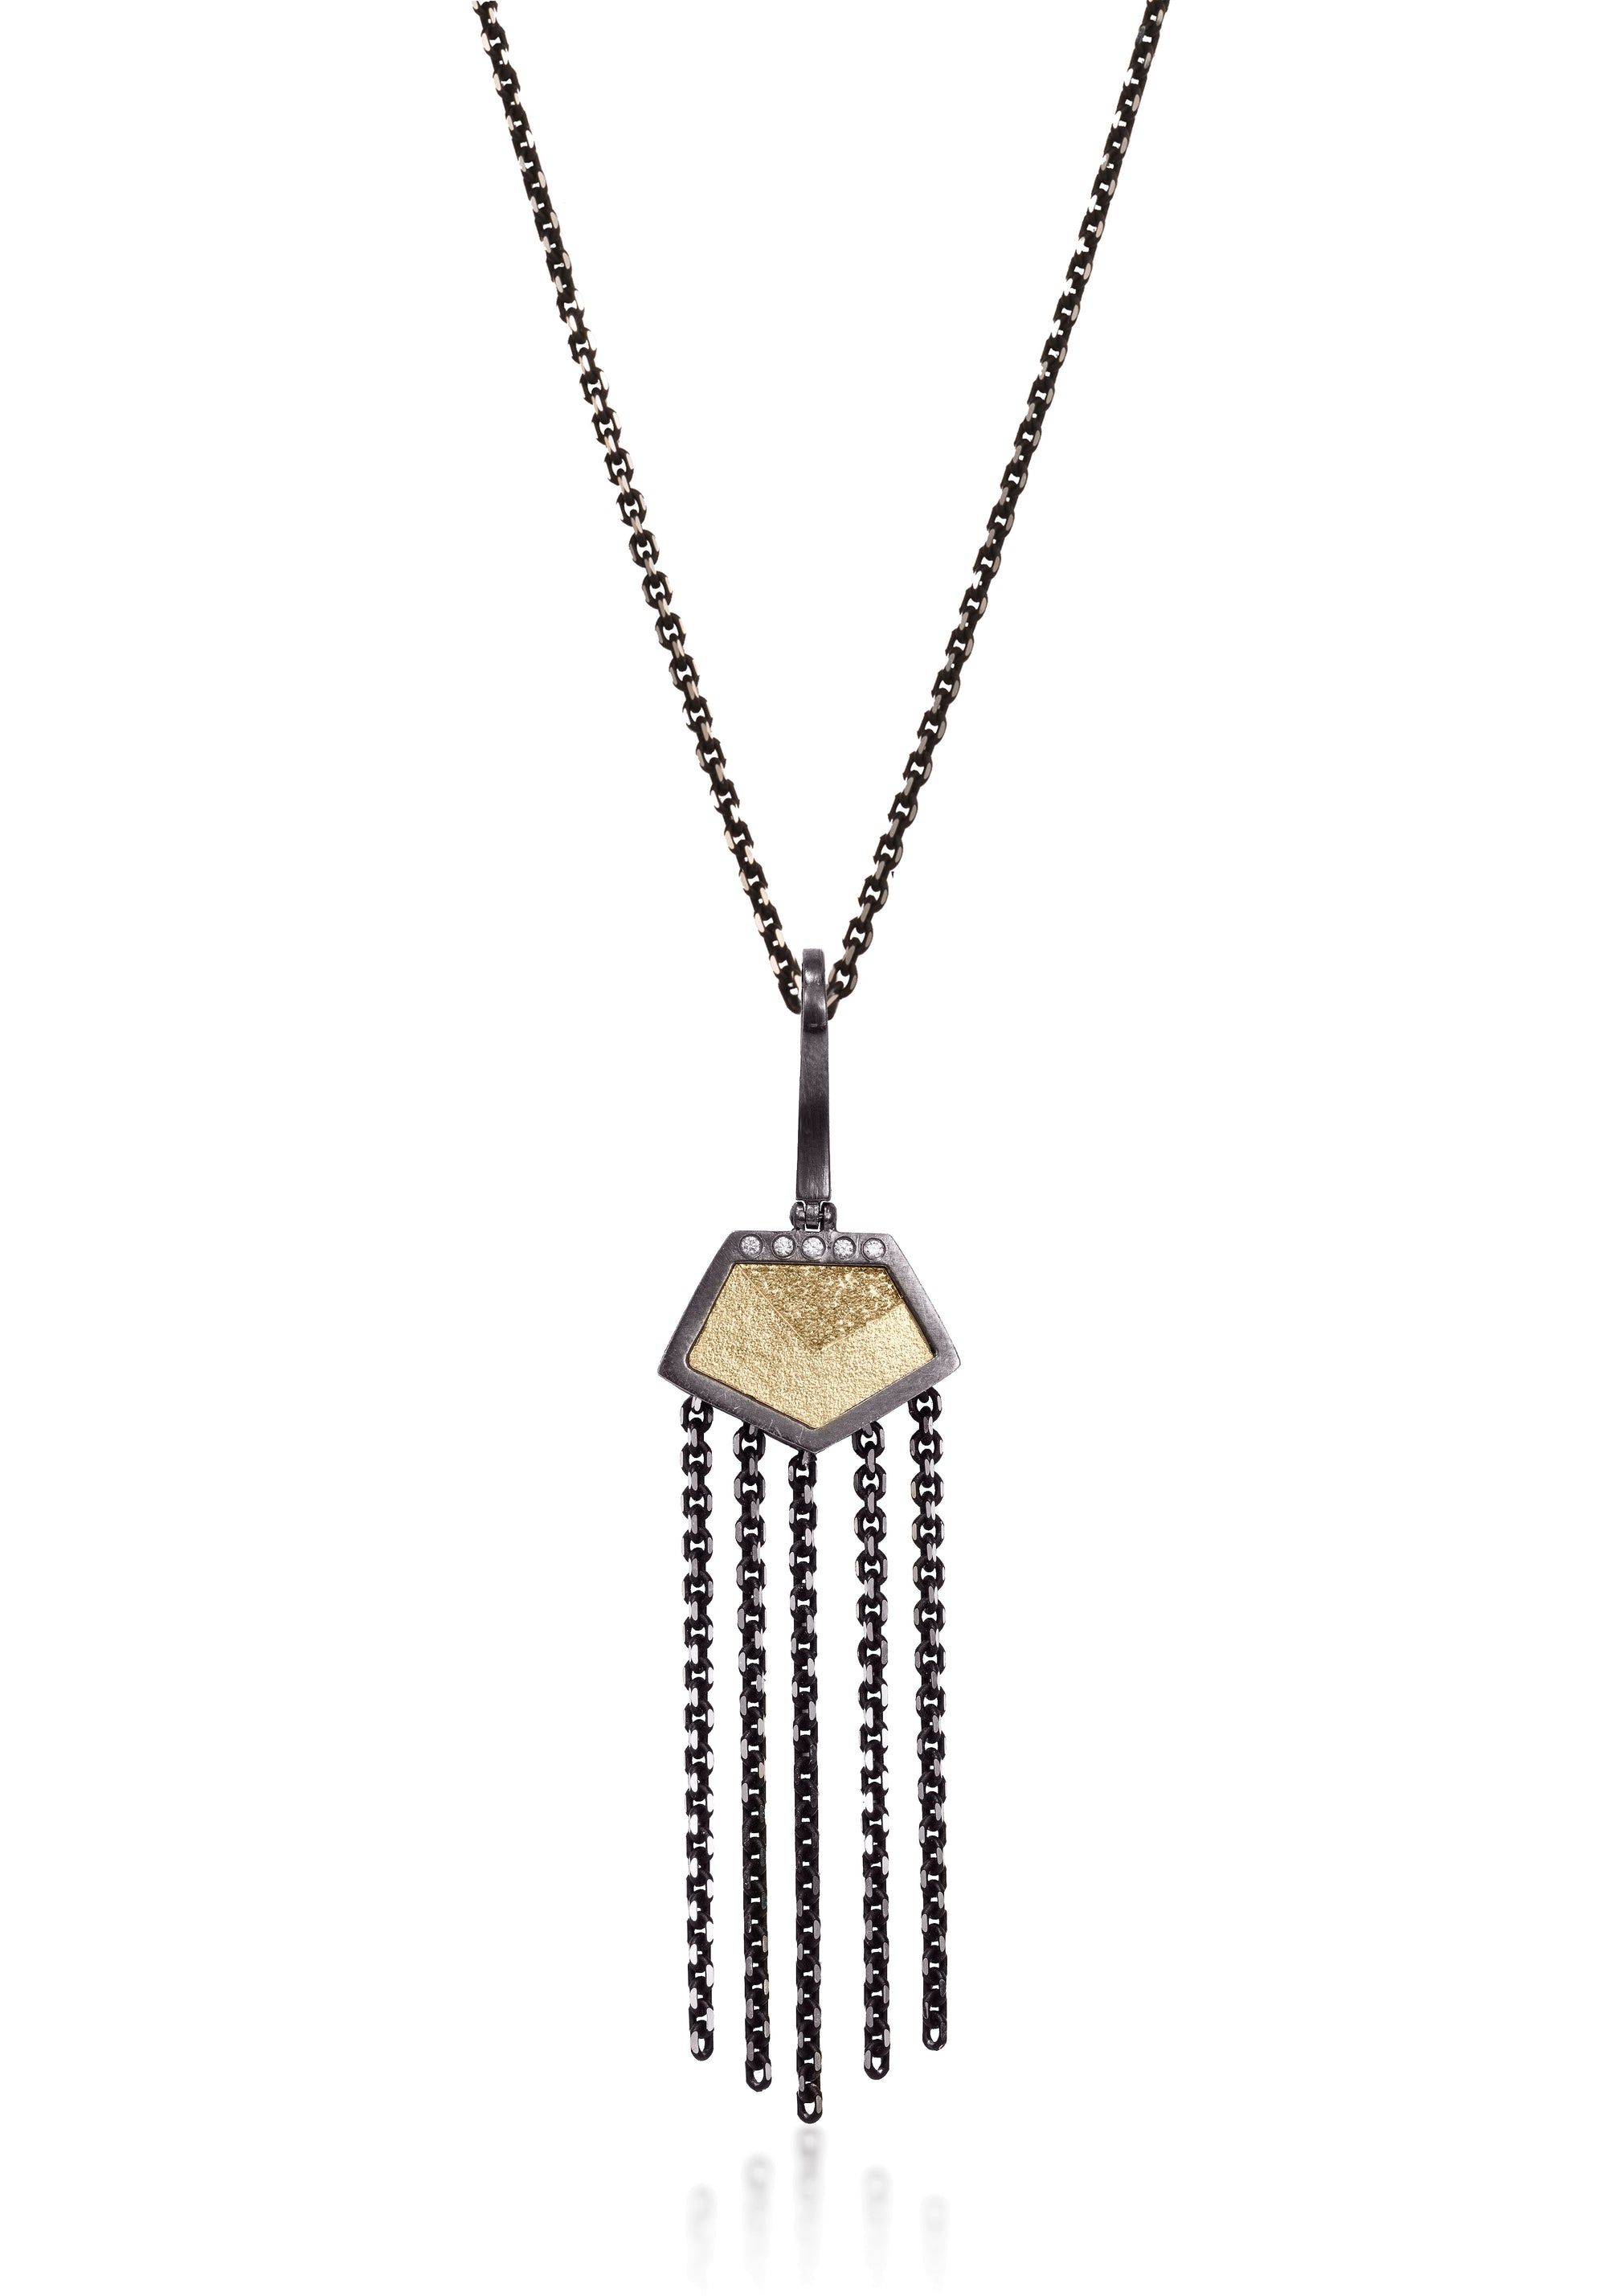 This oxidized sterling silver and richly textured 18k bimetal pendant is flush set with ideal cut white diamonds.  Hinged bail of oxidized sterling available as a fixed or enhancer bail. Accent facet glitters with the texture of diamond facets, individually scored and hand textured, with dangling diamond cut fringe. Size extra small.  0.0345 tcw